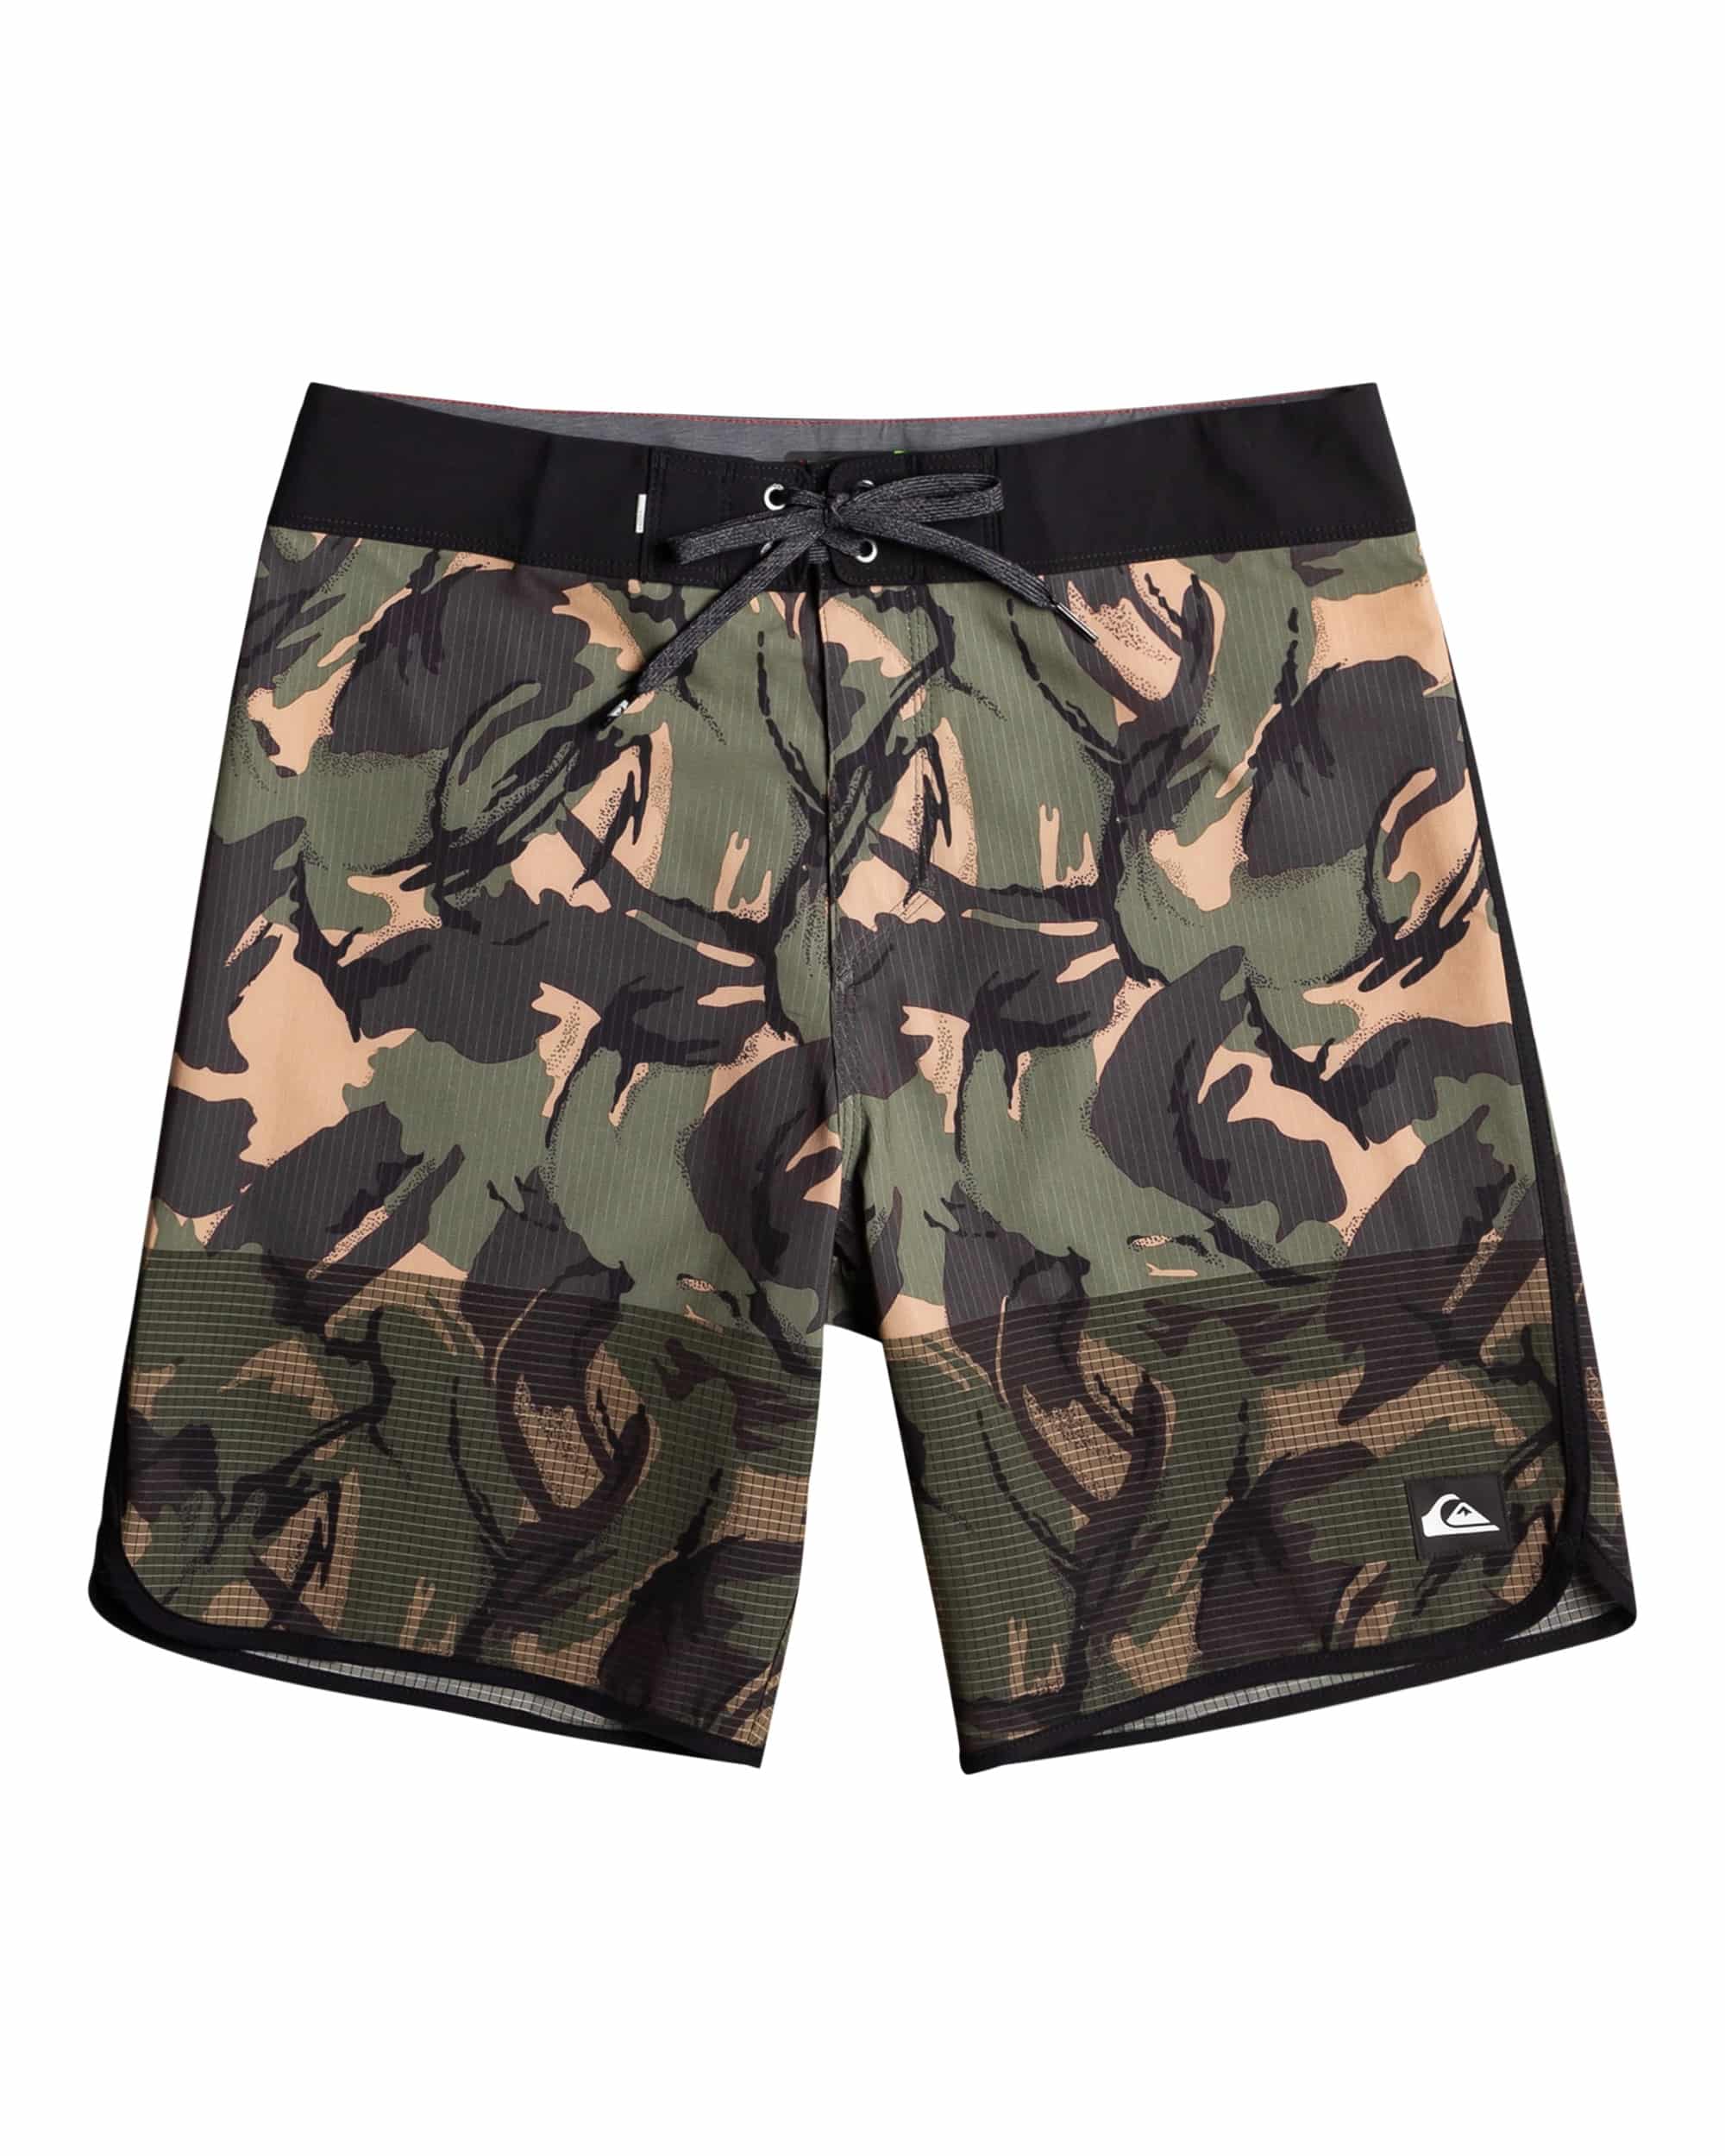 The Original Boardshort Company Quiksilver Reintroduces One Of Its Most ...